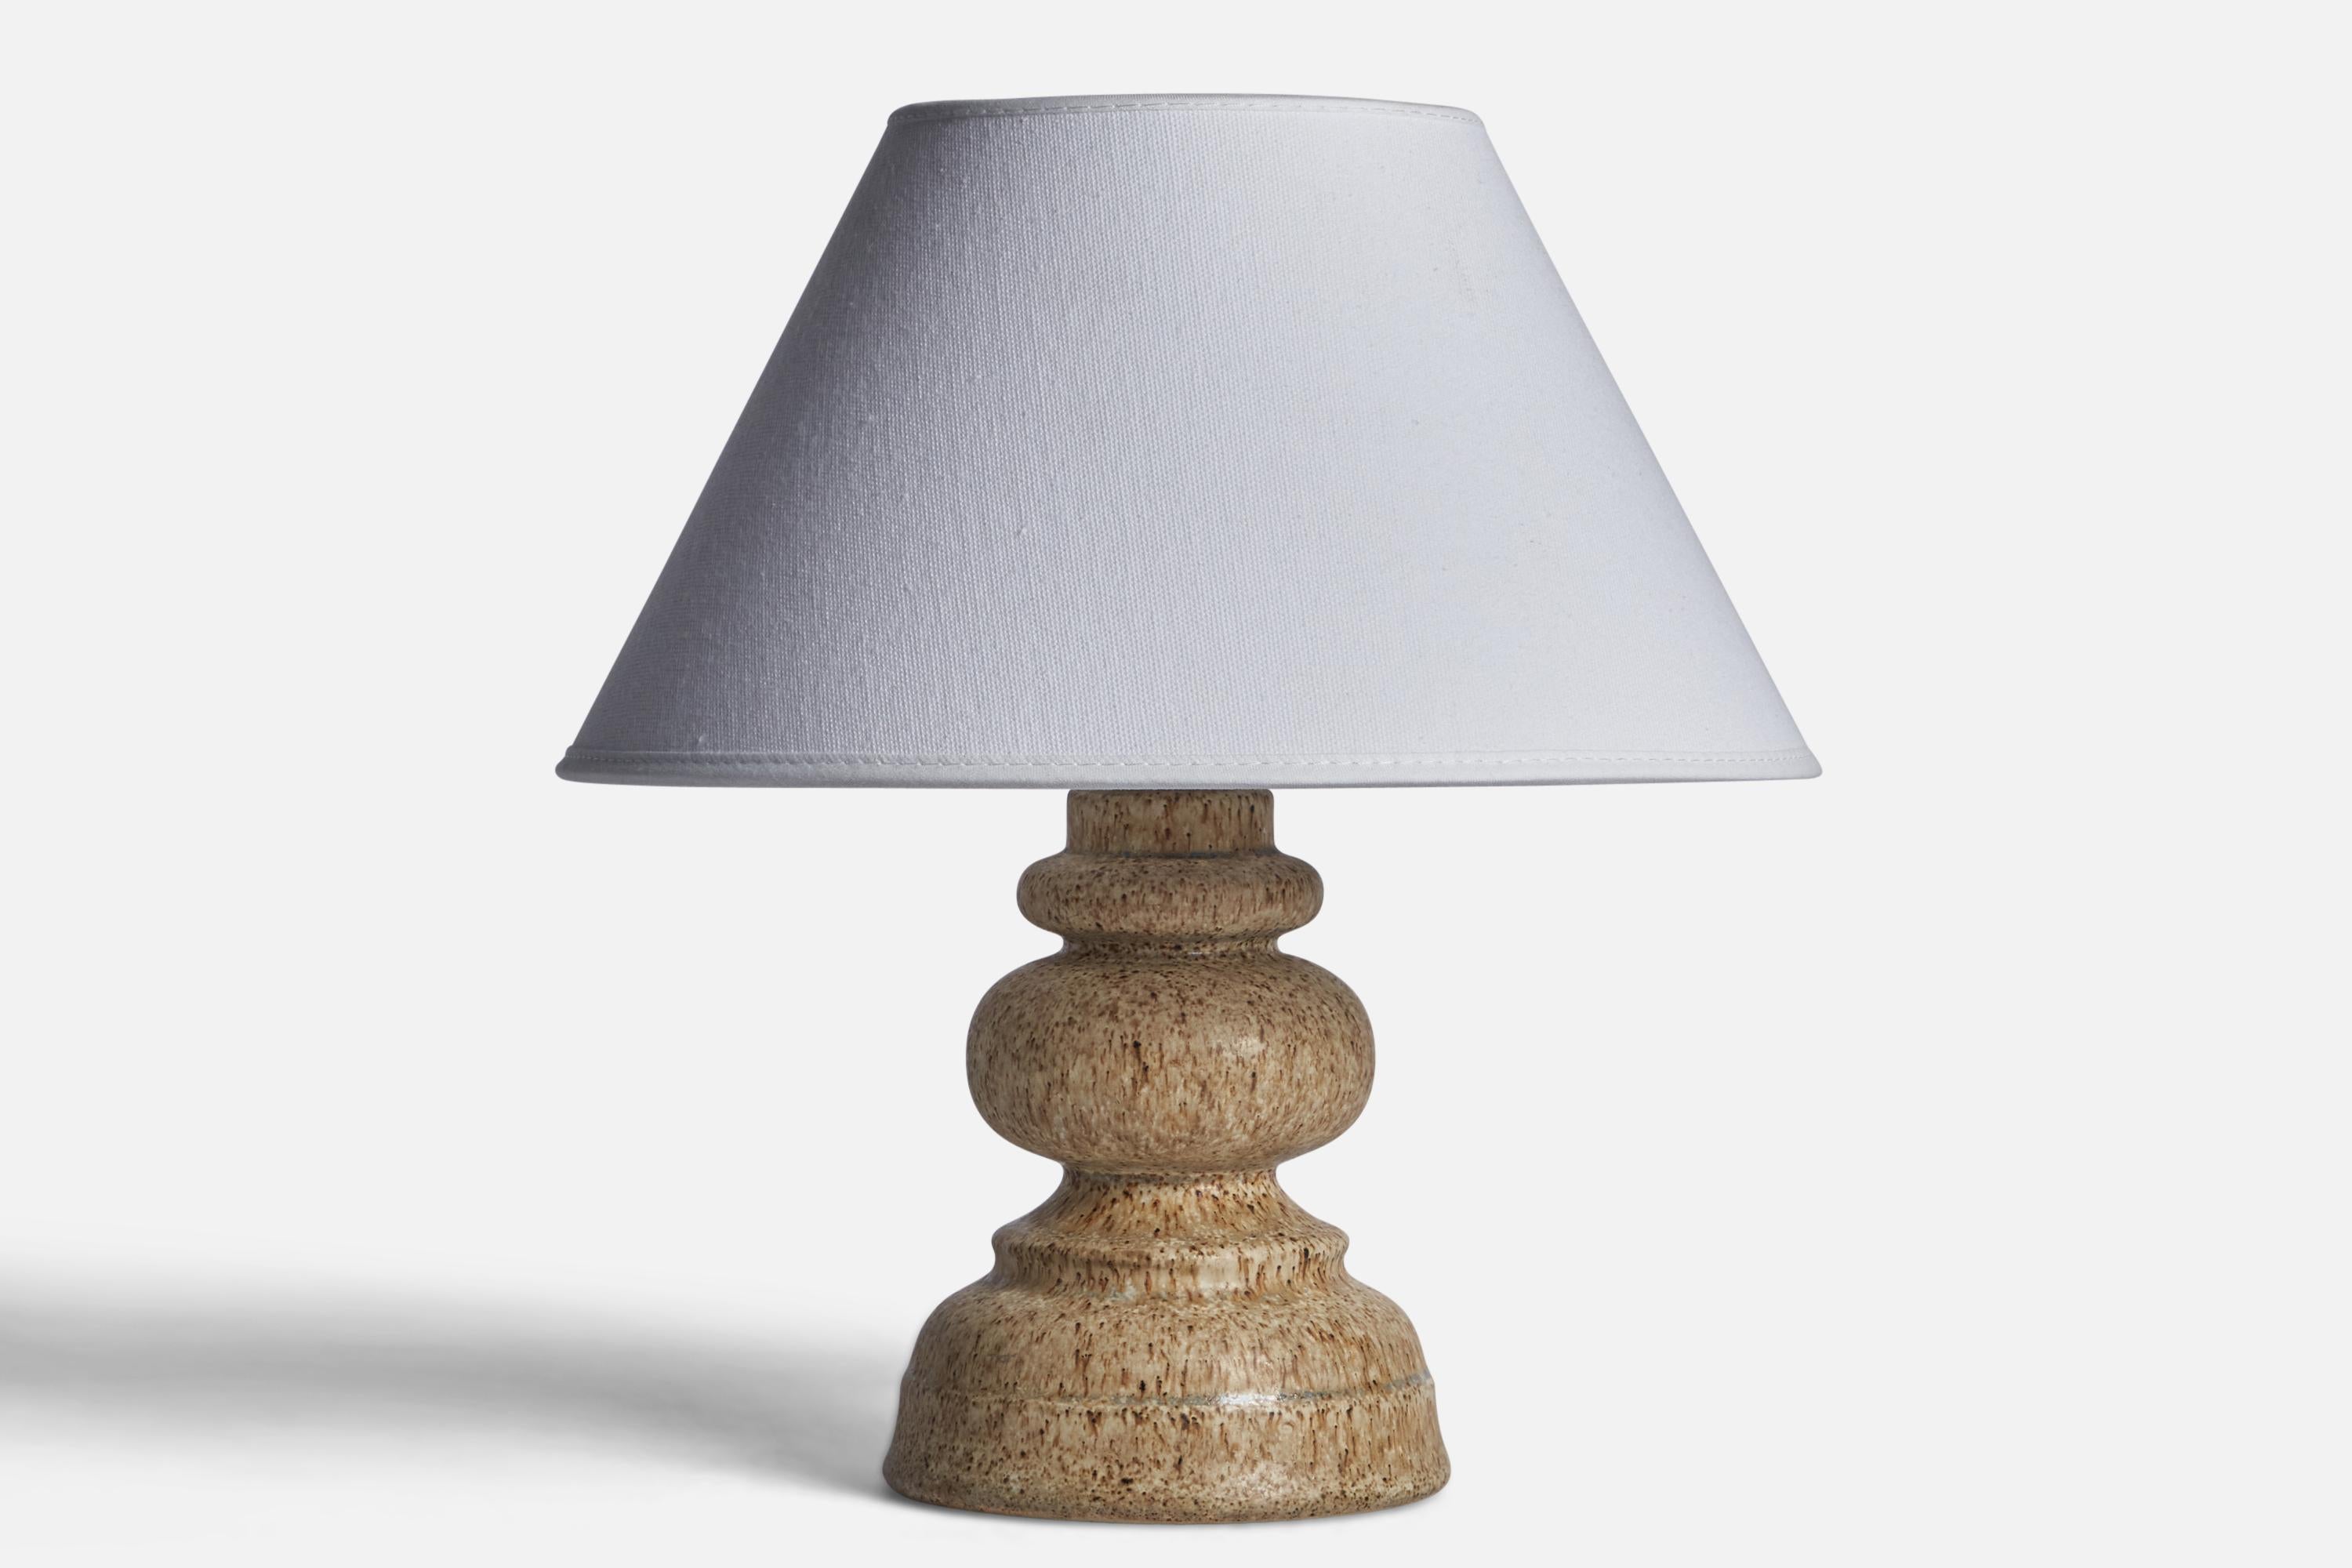 A grey-glazed stoneware table lamp produced by Ego Stengods, Sweden, c. 1960s.

Dimensions of Lamp (inches): 7.75” H x 4.55” Diameter
Dimensions of Shade (inches): 7” Top Diameter x 10” Bottom Diameter x 5.5” H 
Dimensions of Lamp with Shade